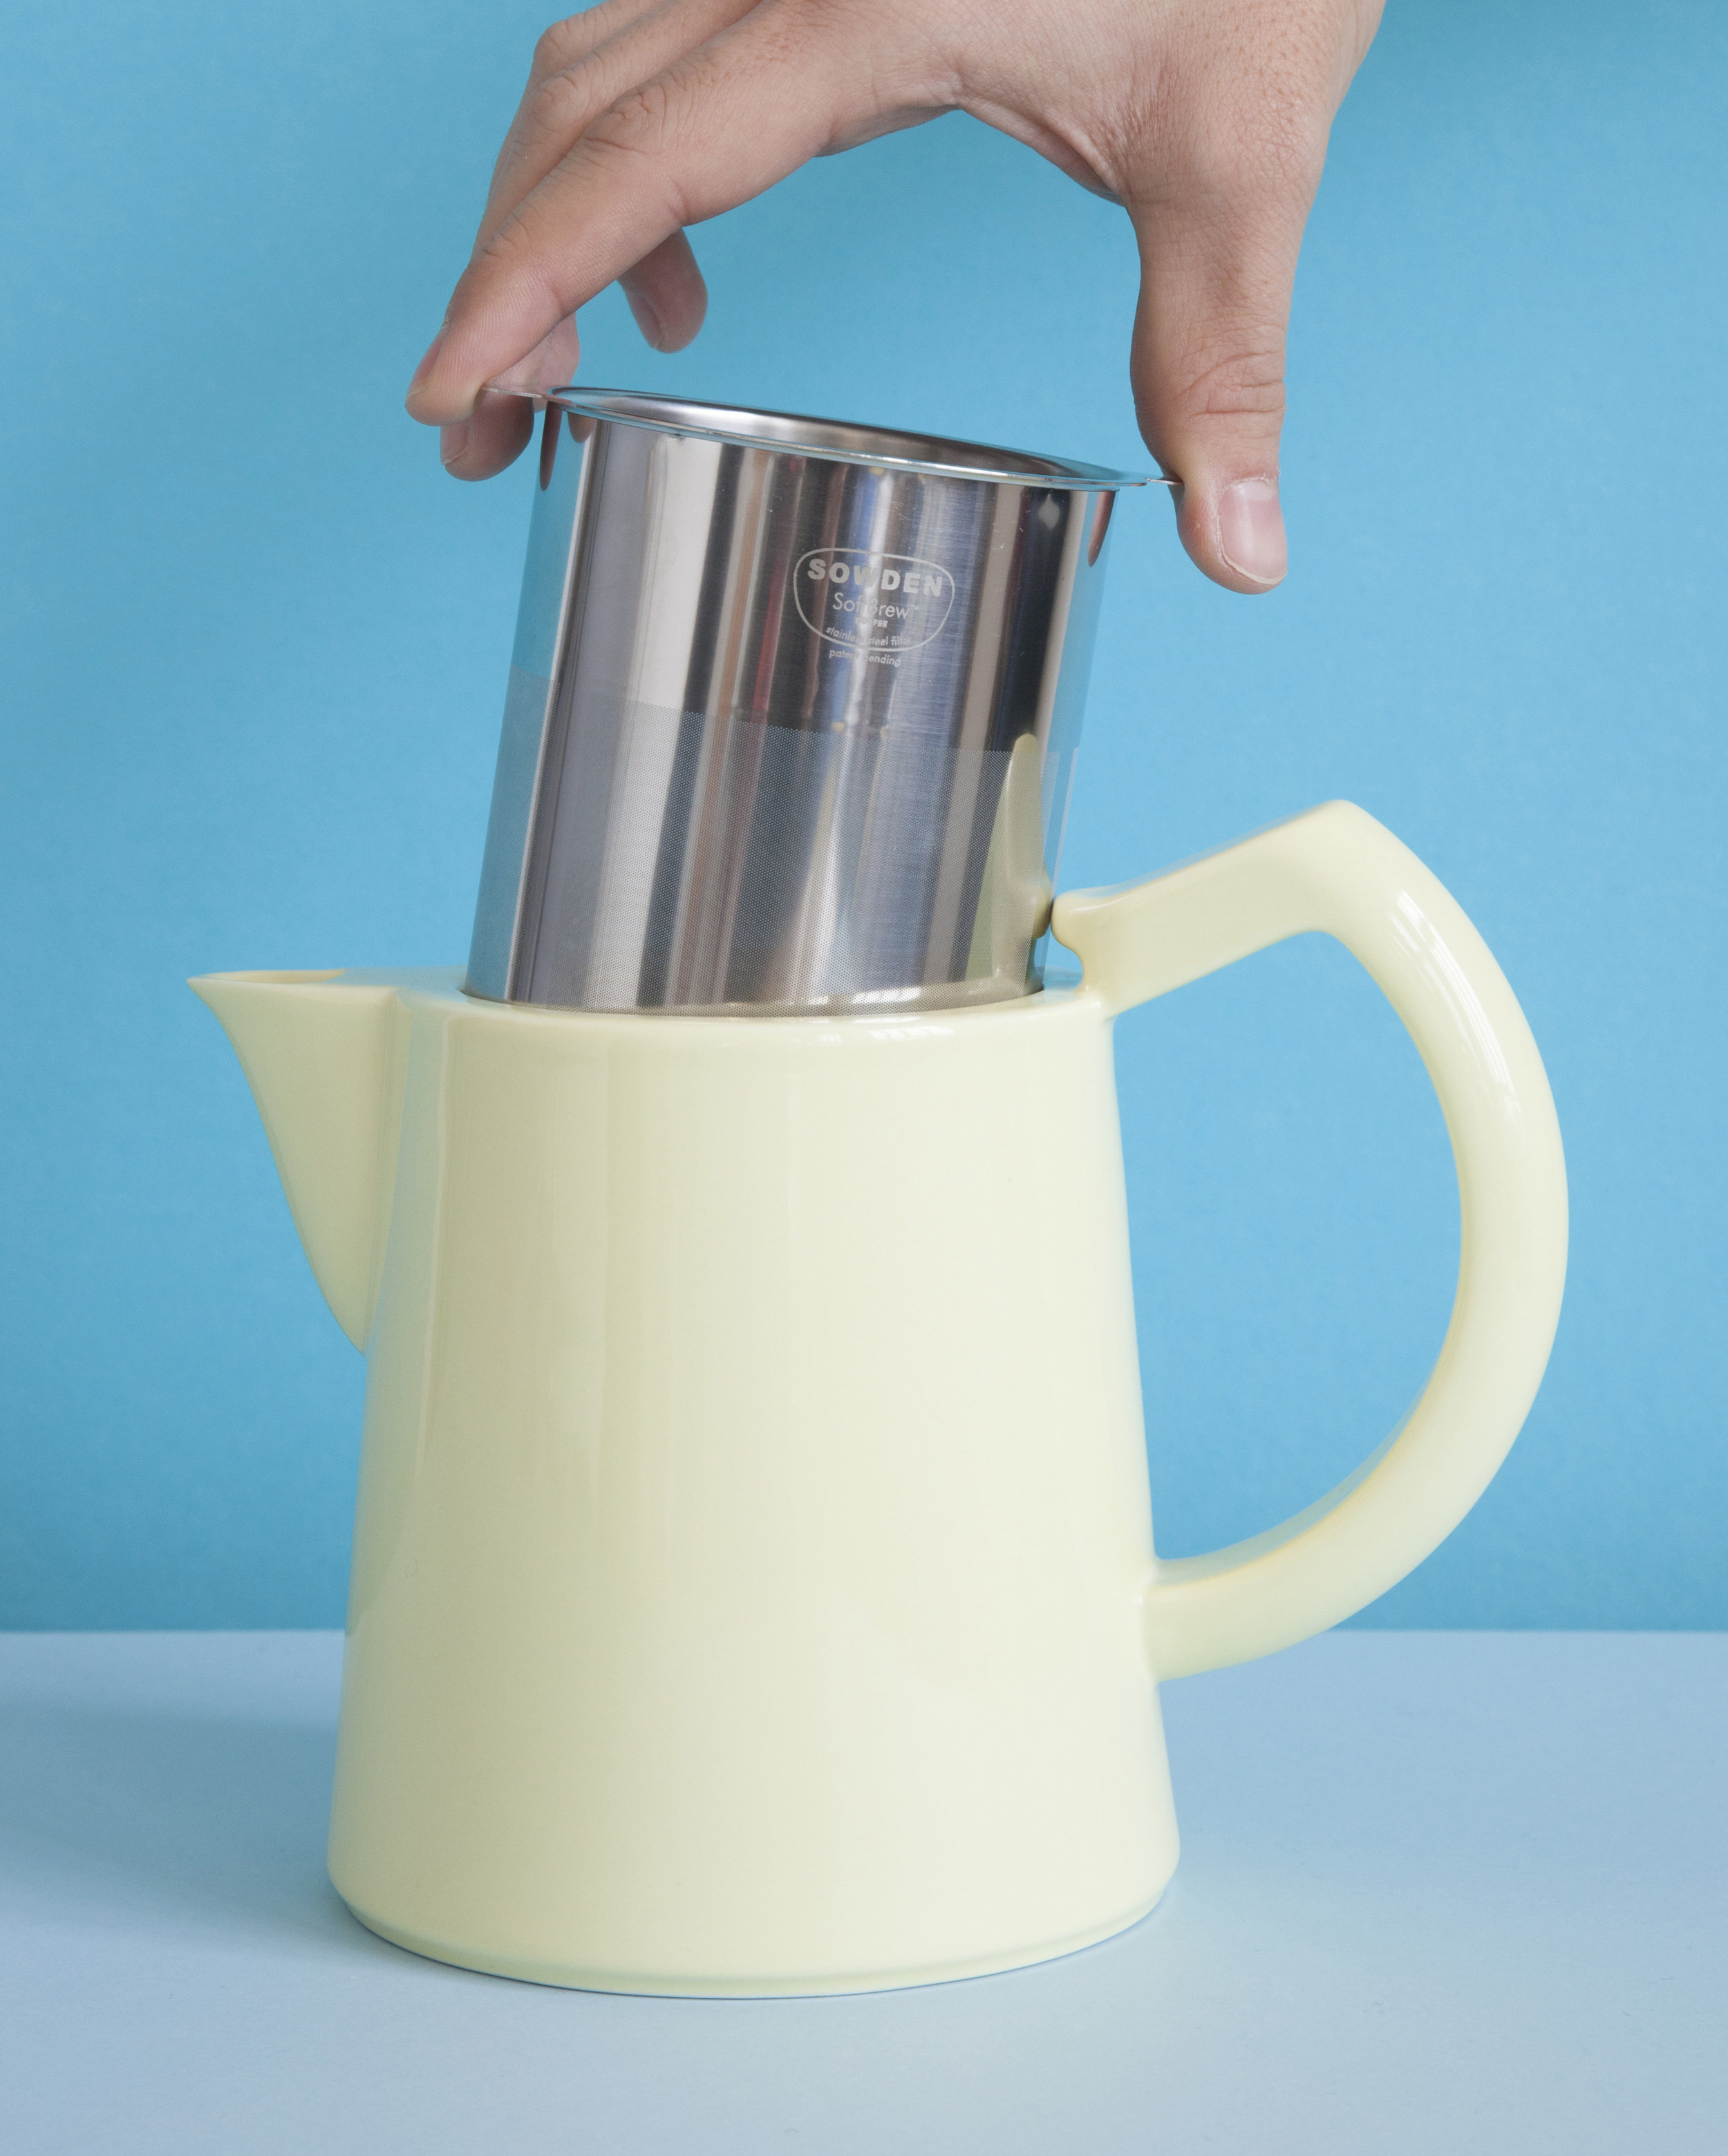 HAY George Sowden Coffeepot – MoMA Design Store